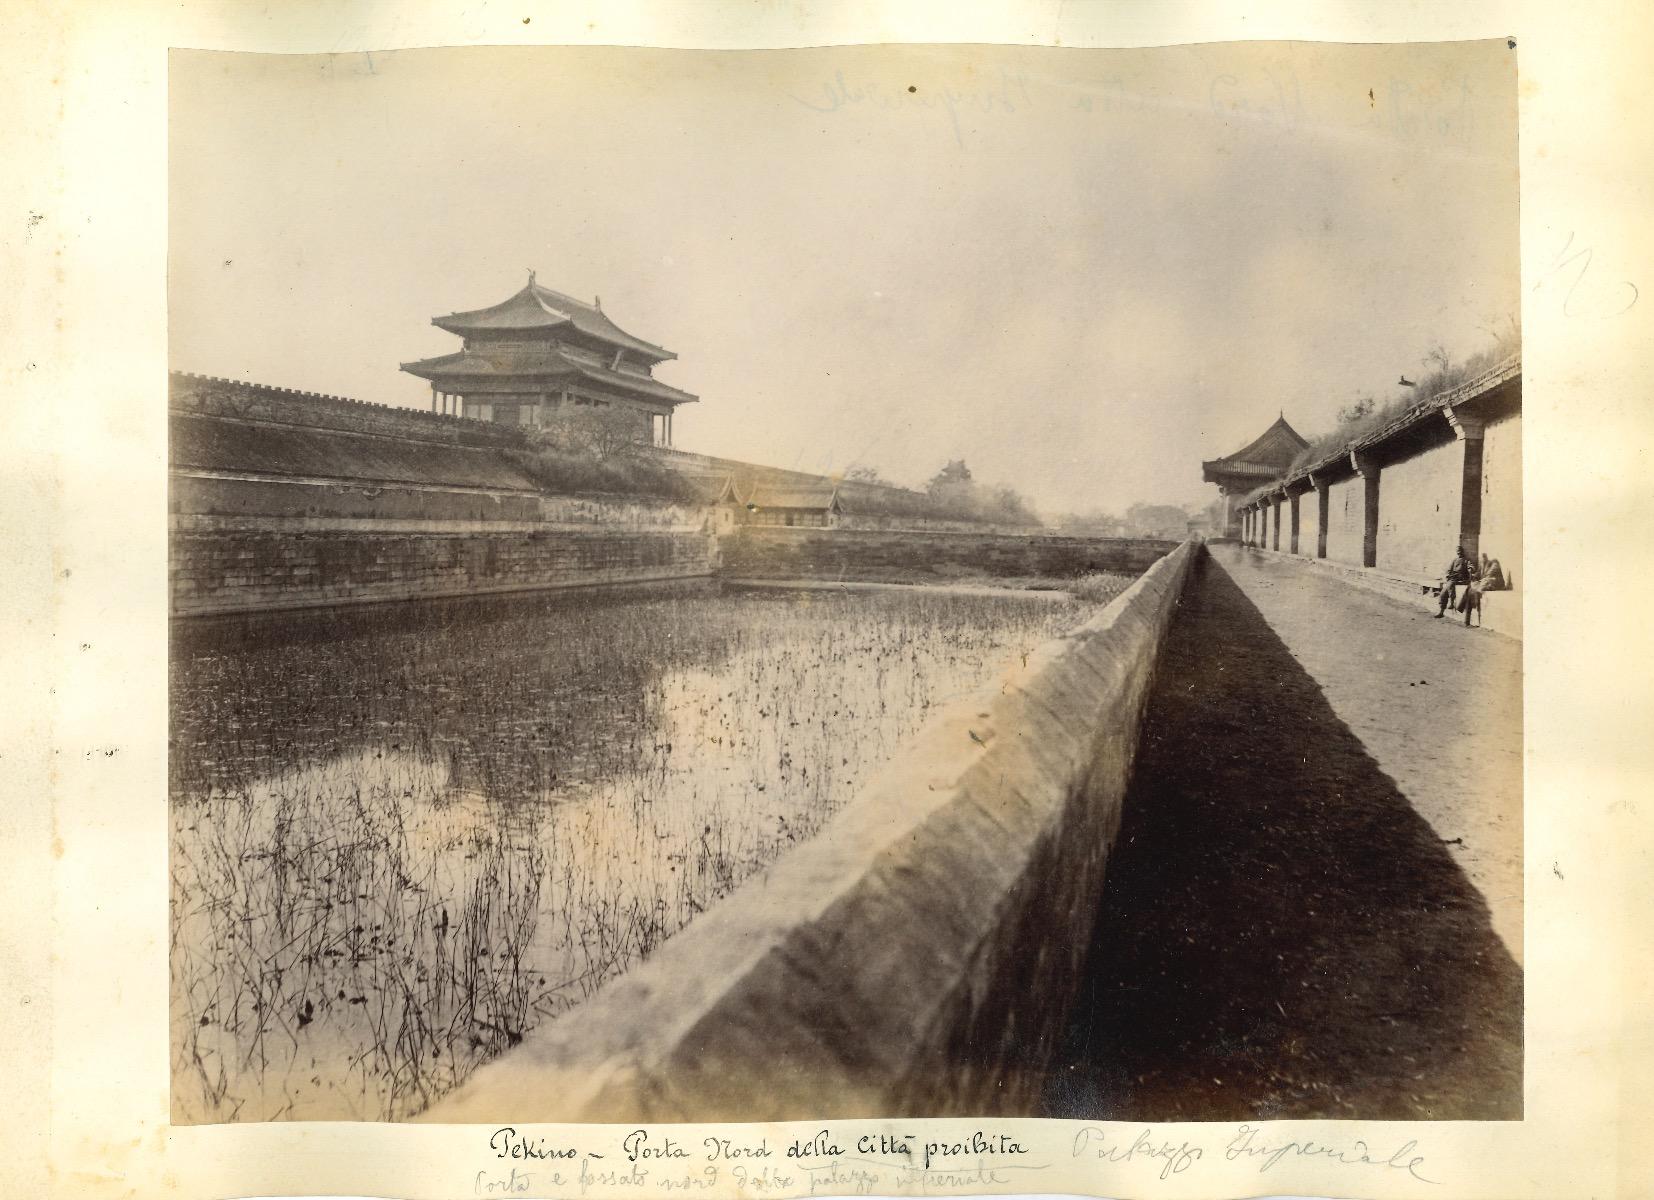 Ancient Views of Beijing - The Forbidden City - Original Albumen Print - 1890s - Photograph by Unknown